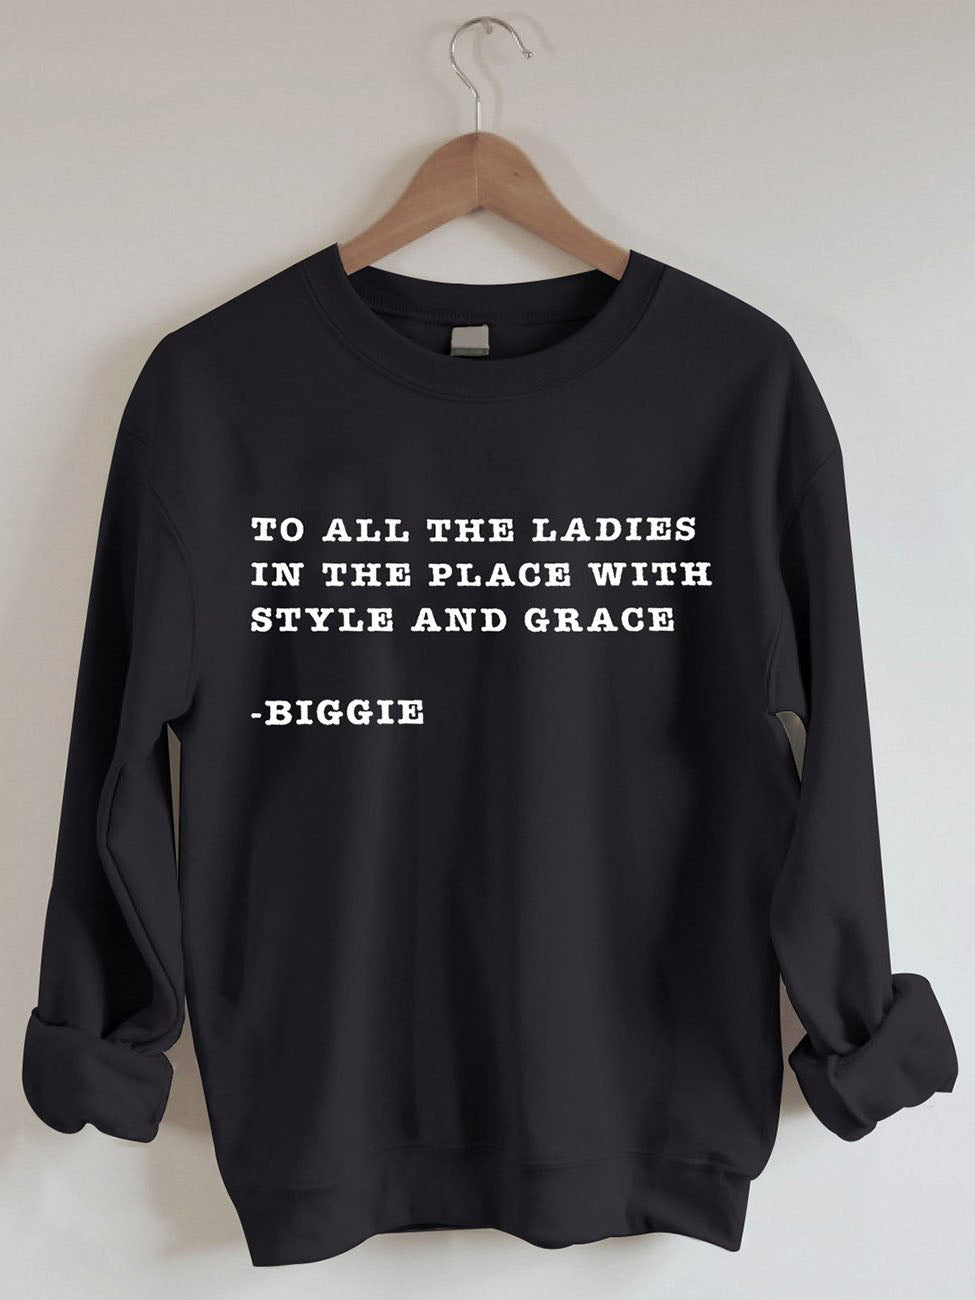 To All The Ladies In The Place With Style And Grace Sweatshirt